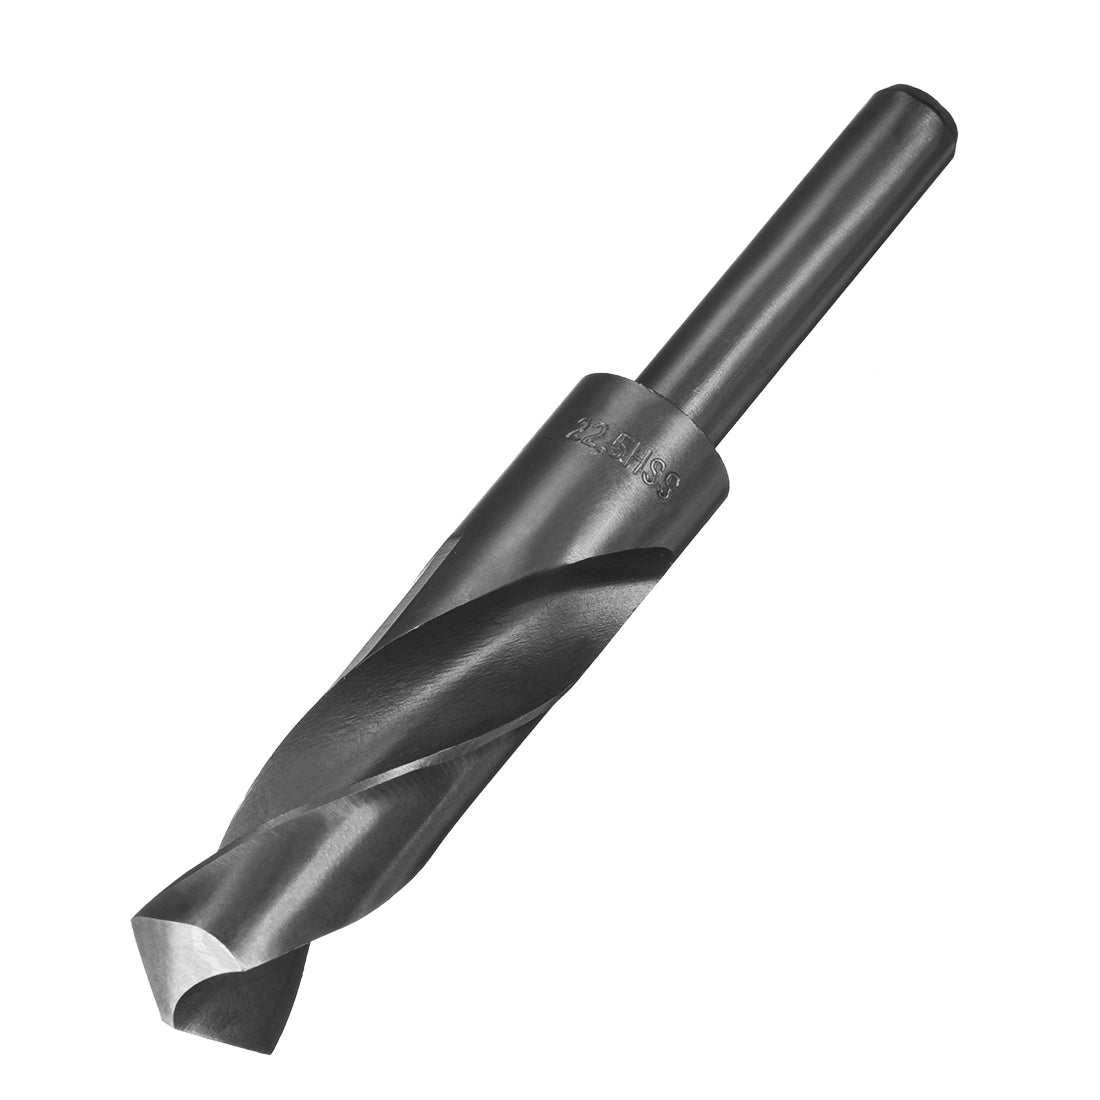 uxcell Uxcell 22.5mm Drill Bit HSS 9341 Black Oxide with 1/2 Inch Straight Reduced Shank